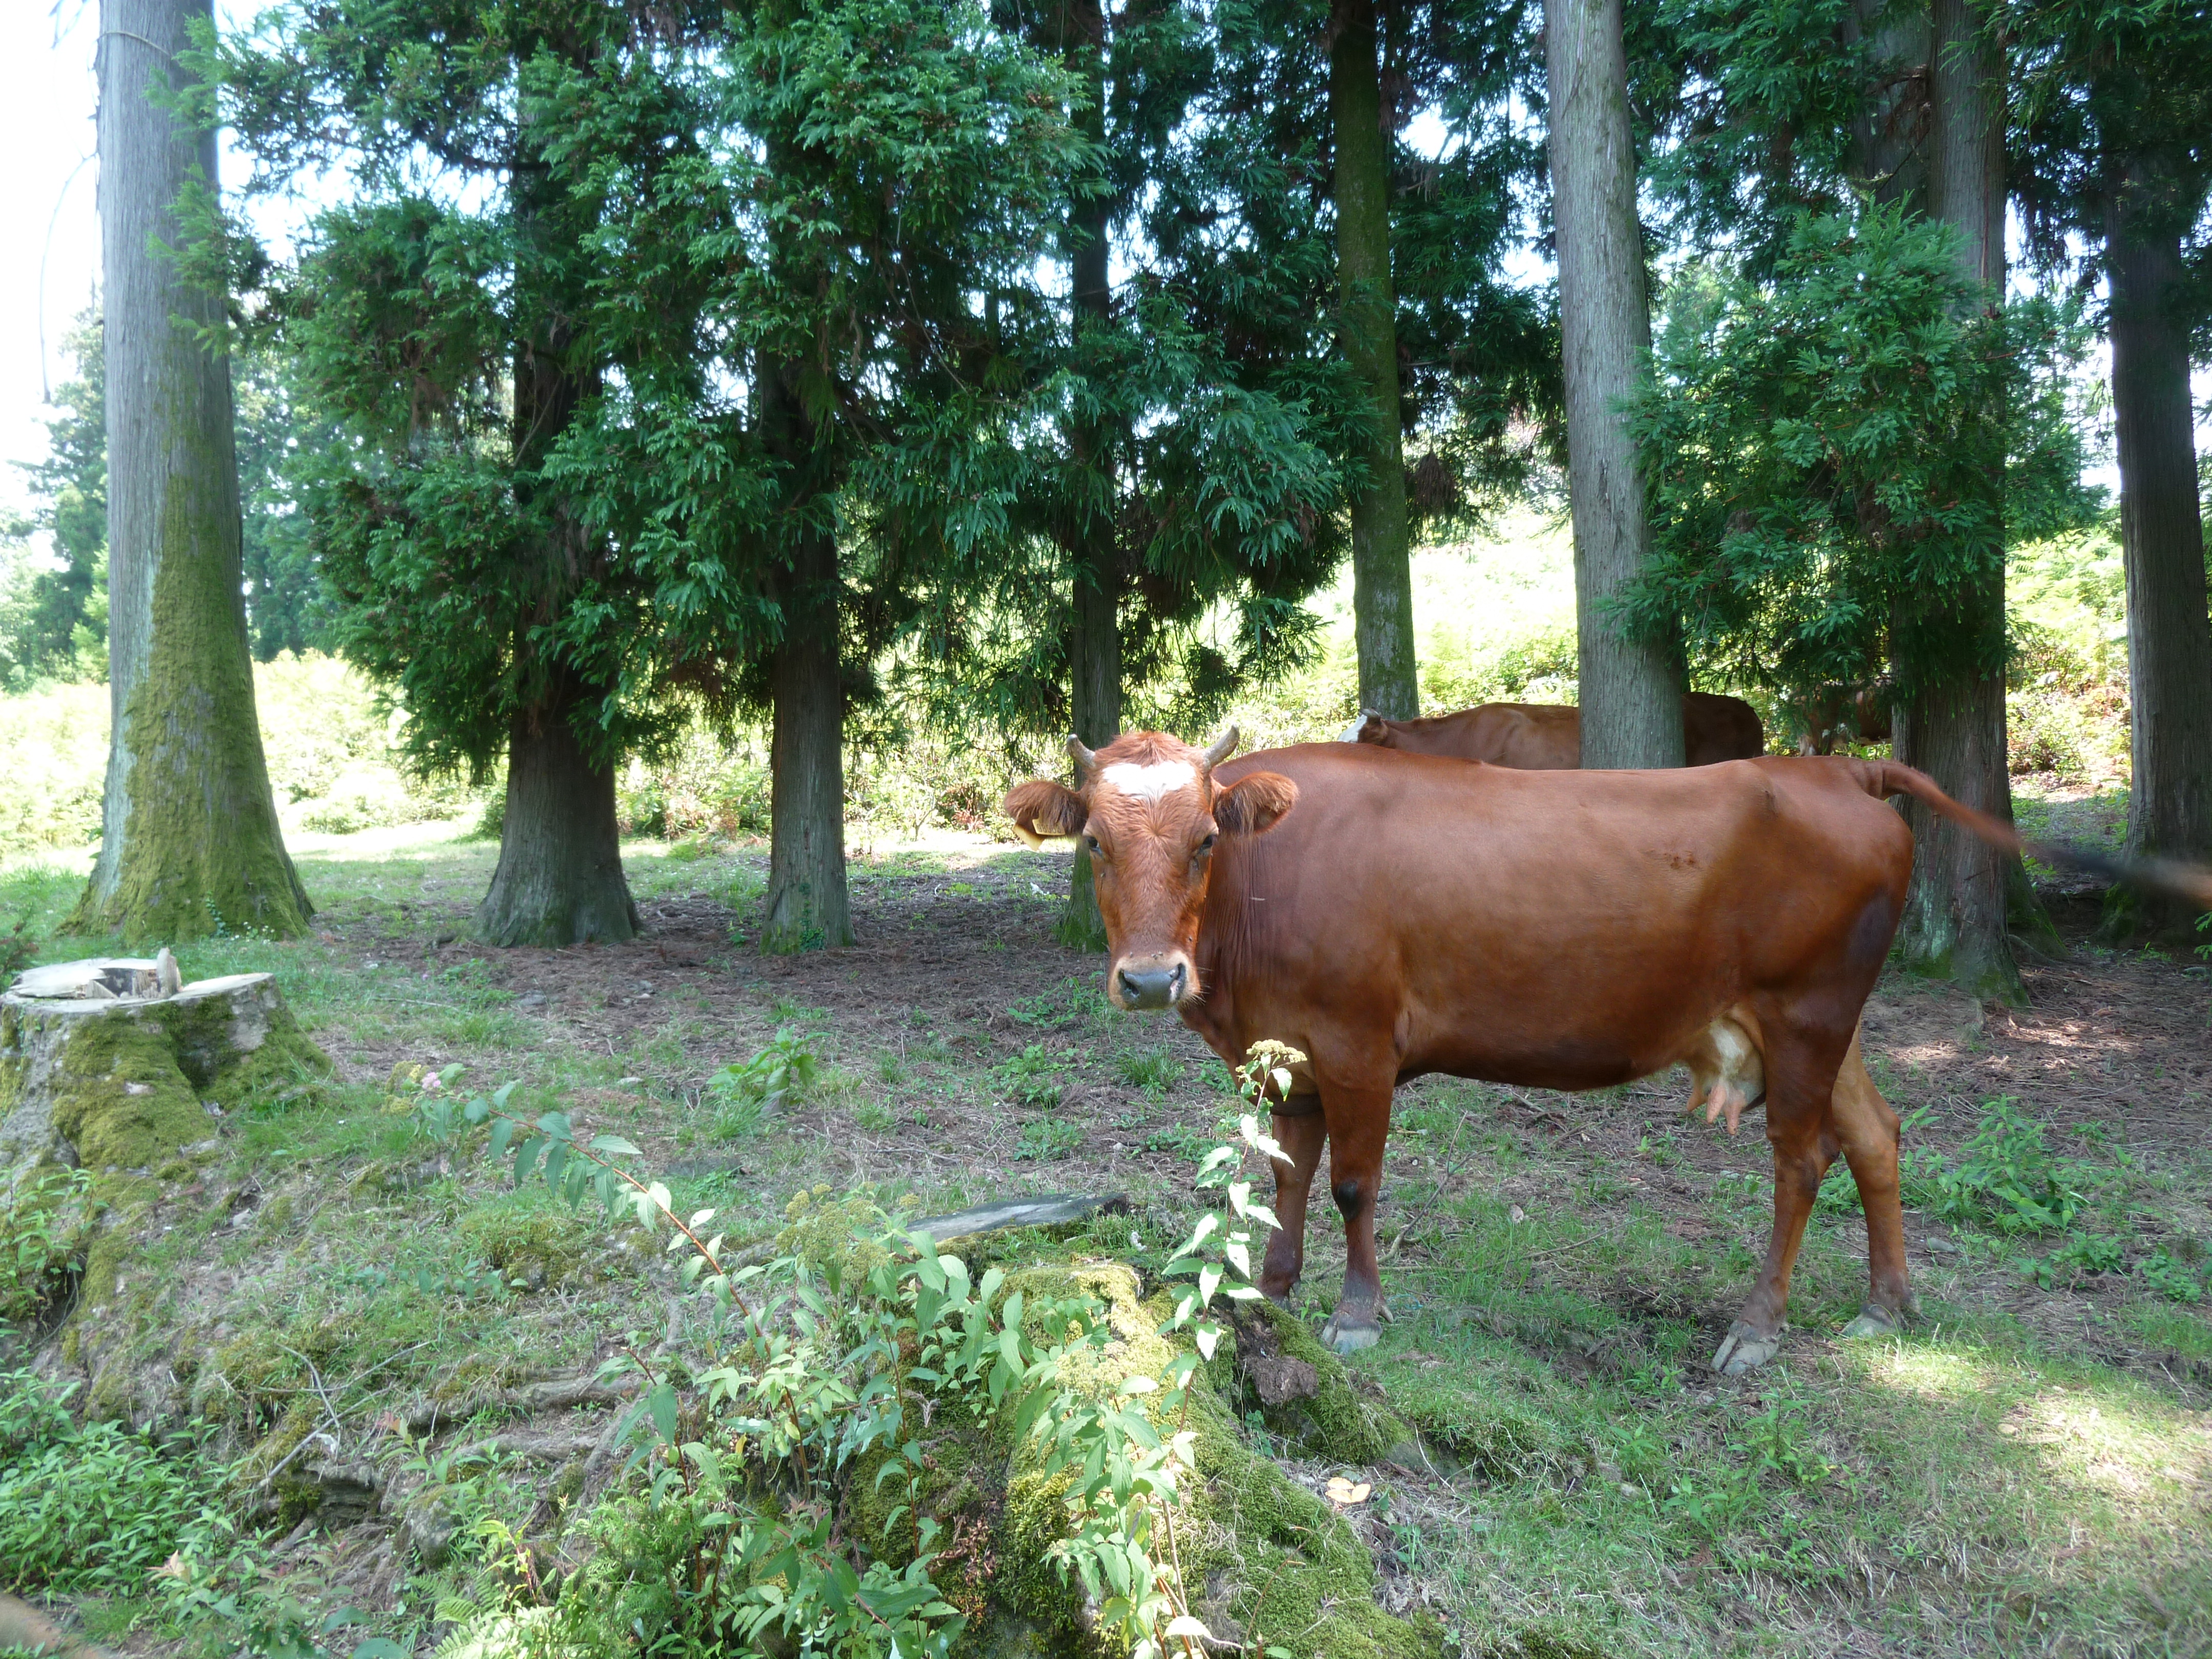 Cows circulating in the ancient tea plantation founded by Konstantin Popov at the end of the 19th century, now abandoned, Tchakvi, Adjarie region, Georgia, July 2016.